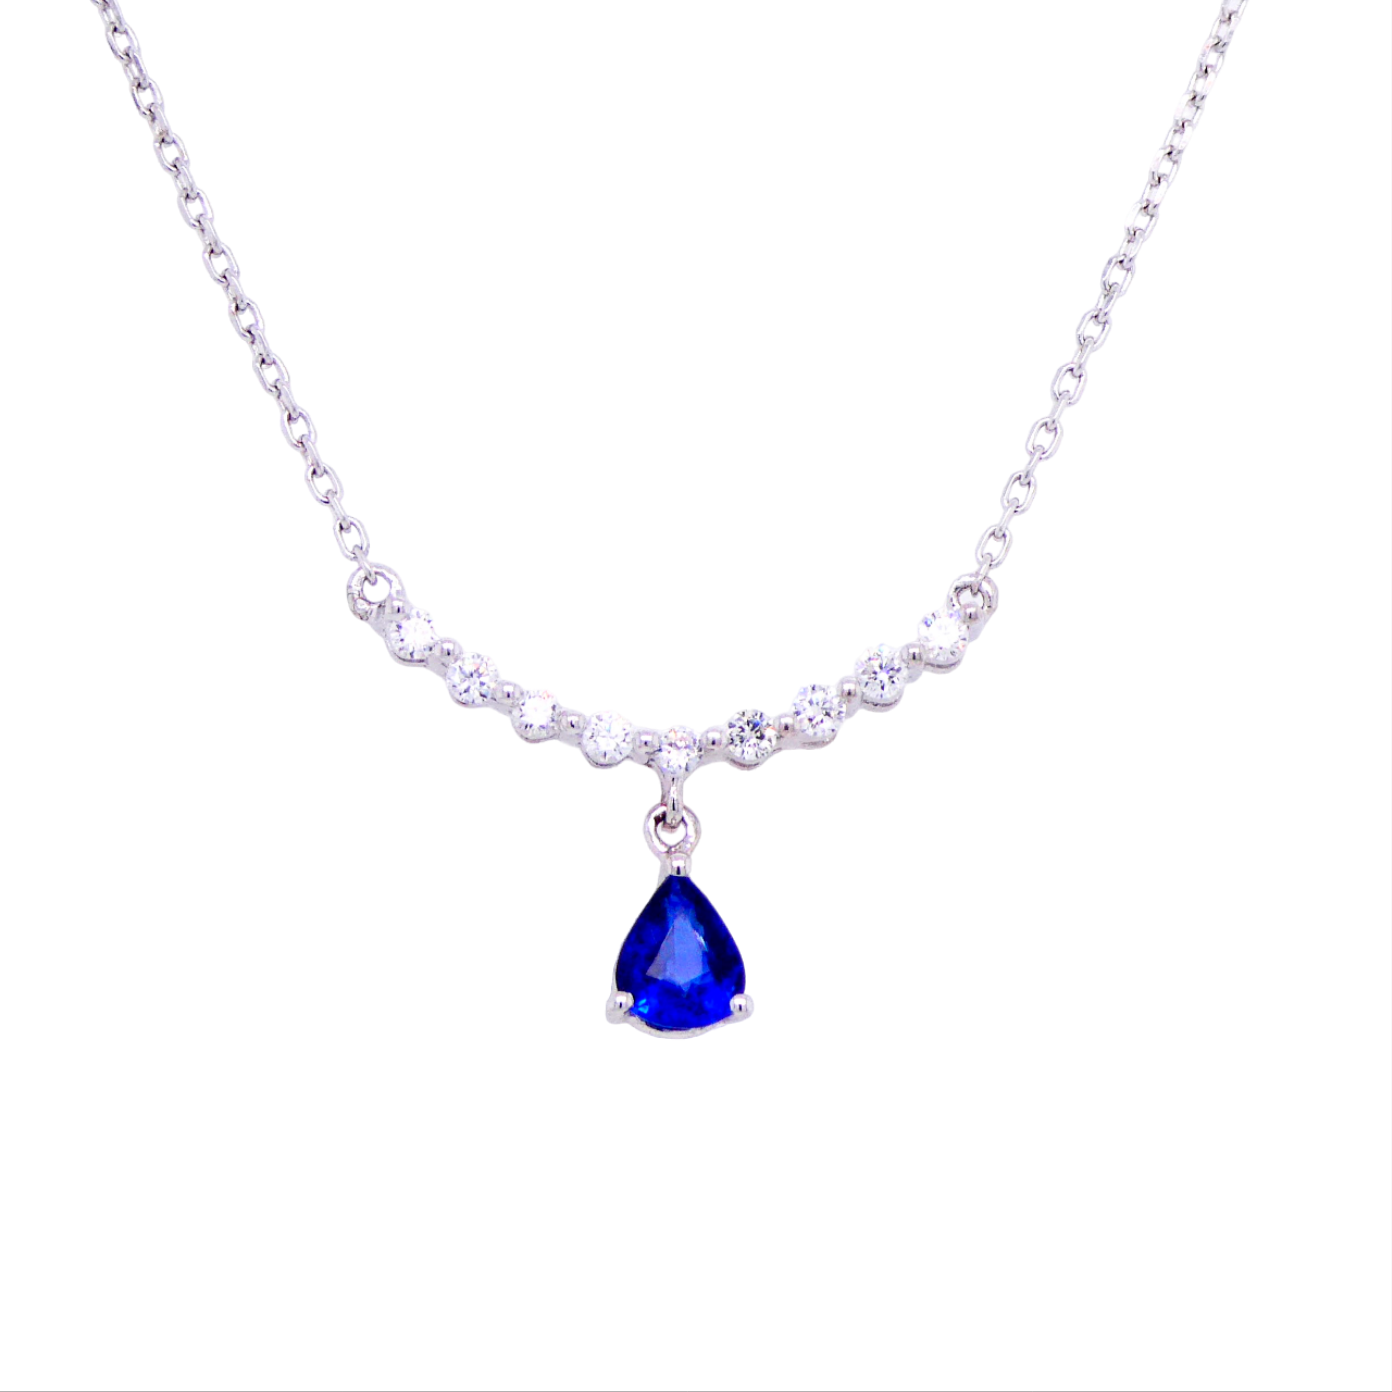 NGG's Collection | Blue sapphire Necklace | NGG Jewellery Destination